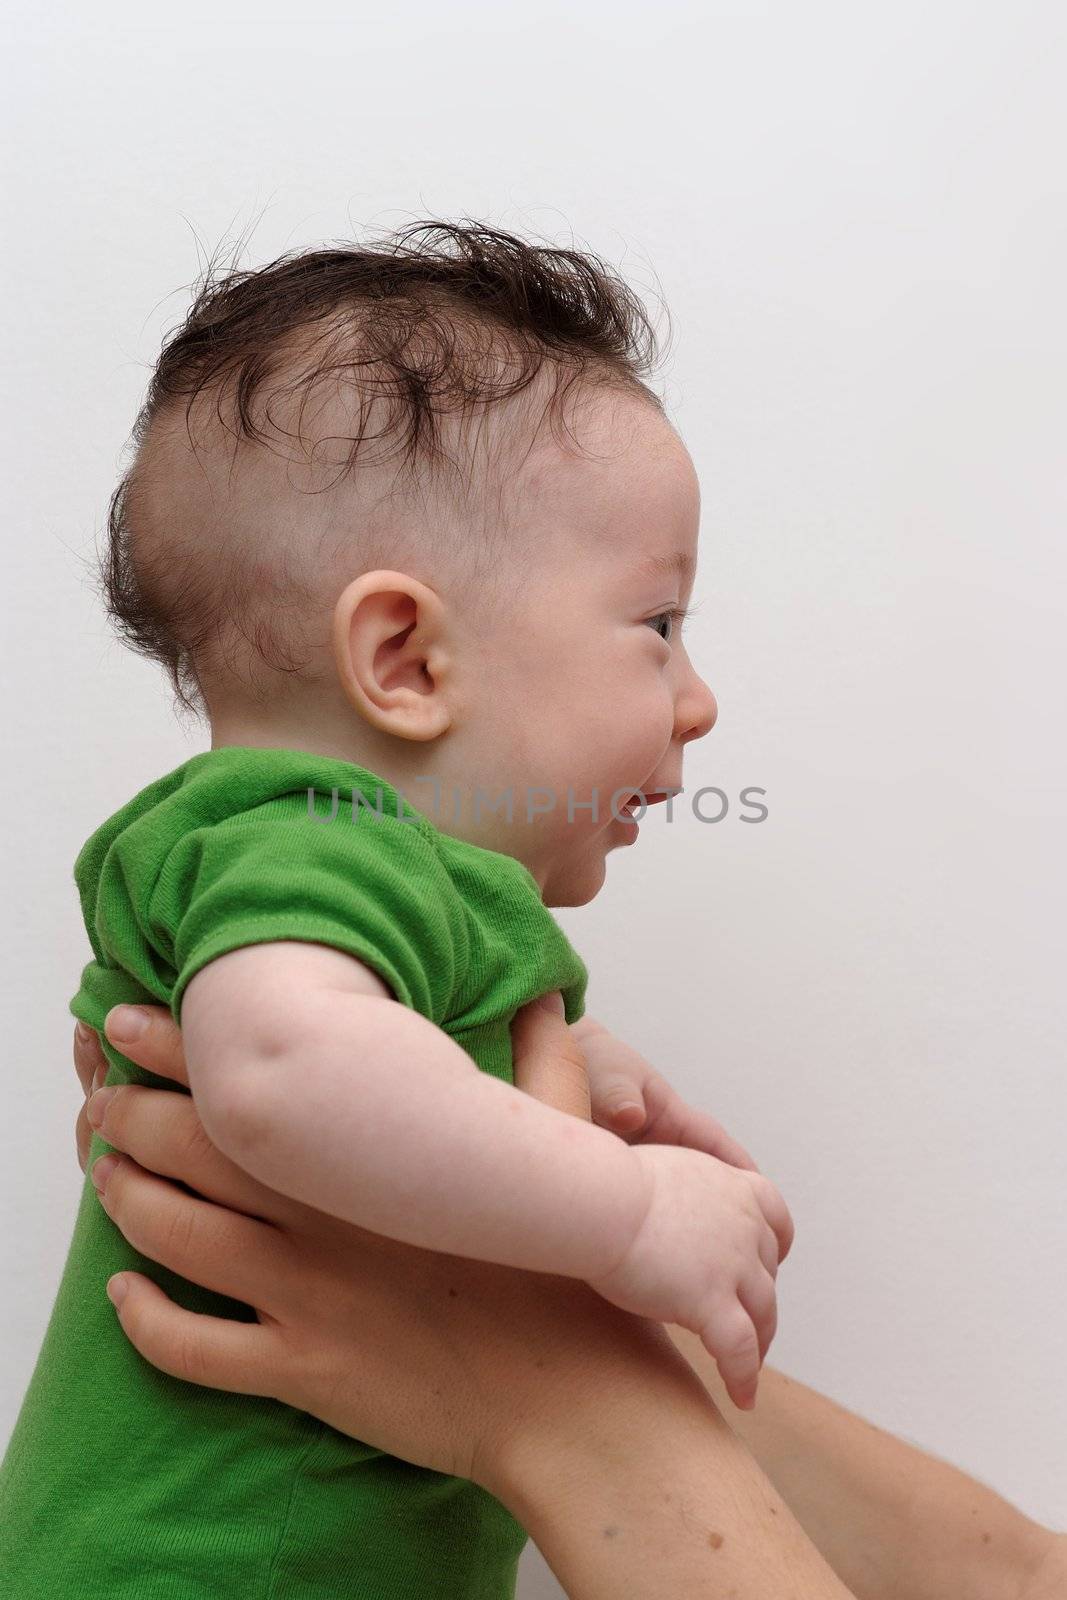 Cute smiling baby held by his mother profile view